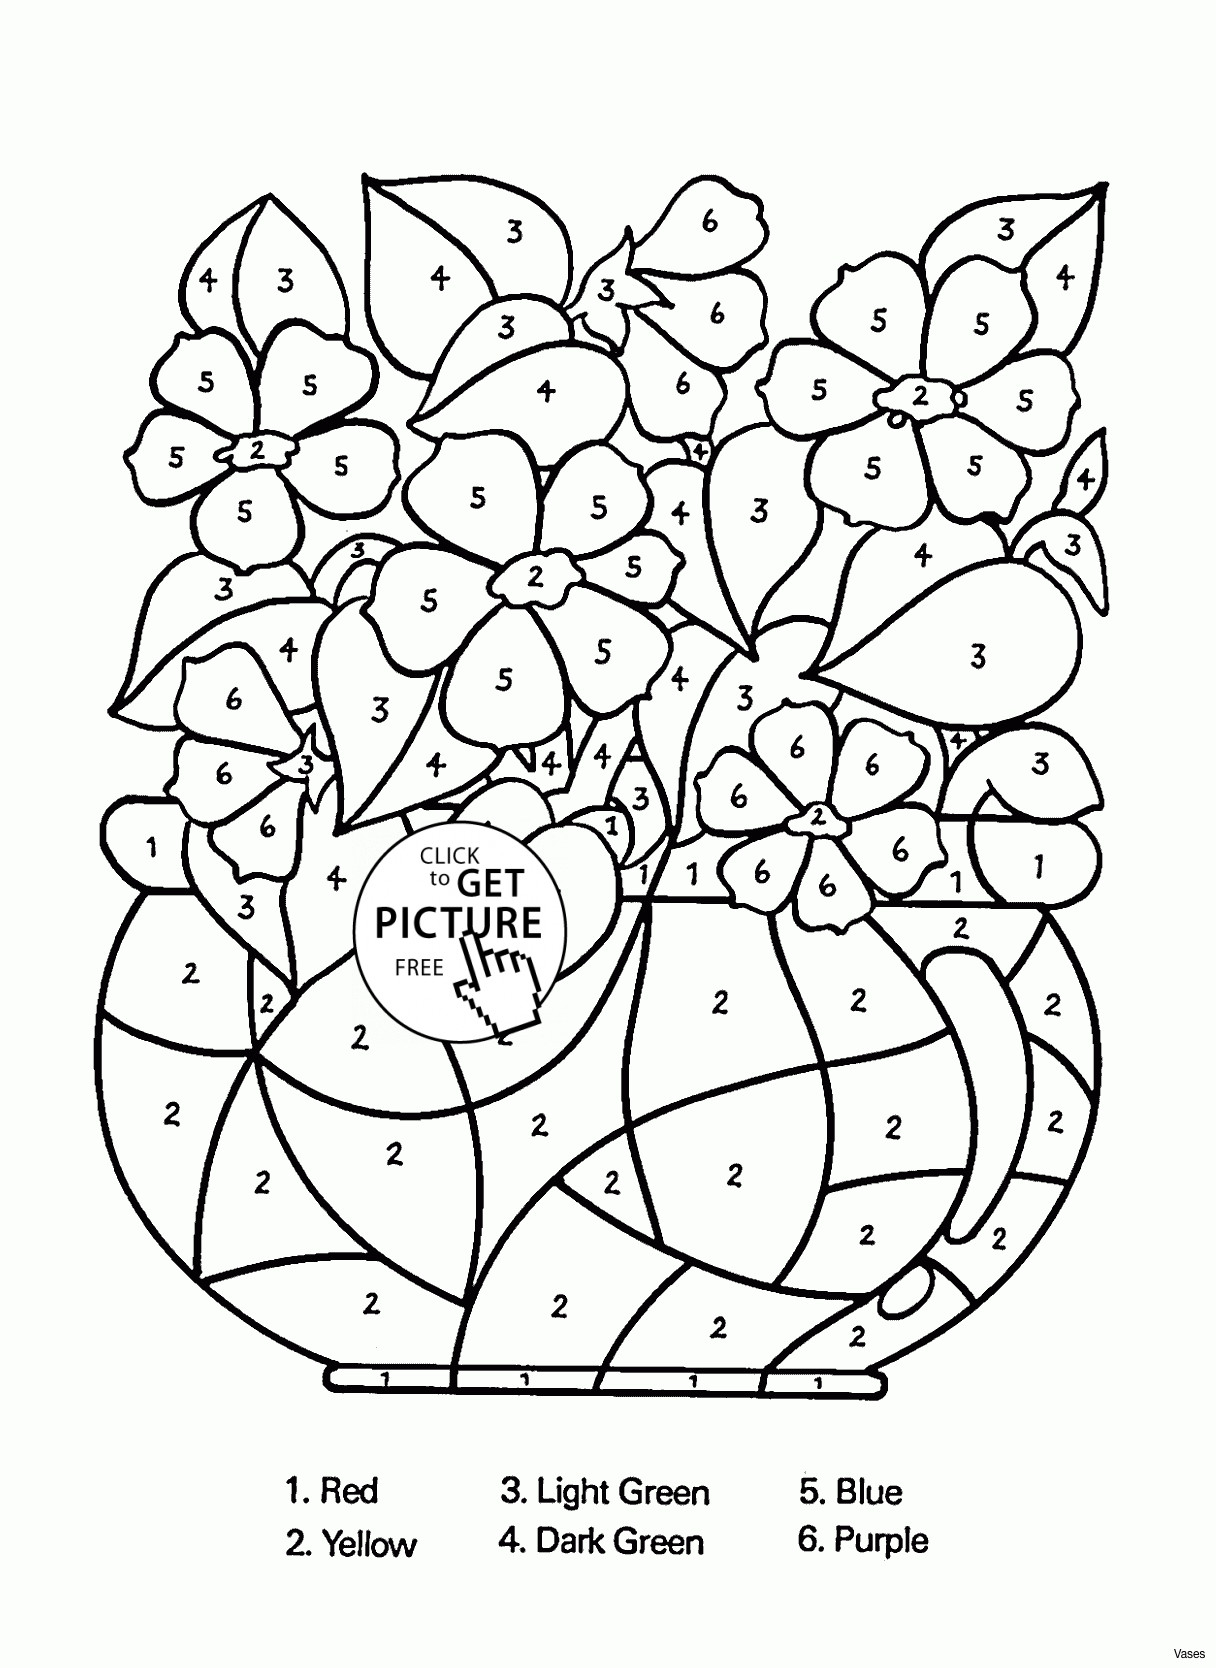 18 Cute Dried Flowers In Vase 2024 free download dried flowers in vase of cool vases flower vase coloring page pages flowers in a top i 0d within interesting coloring pages cool vases flower vase coloring page pages flowers in a top i